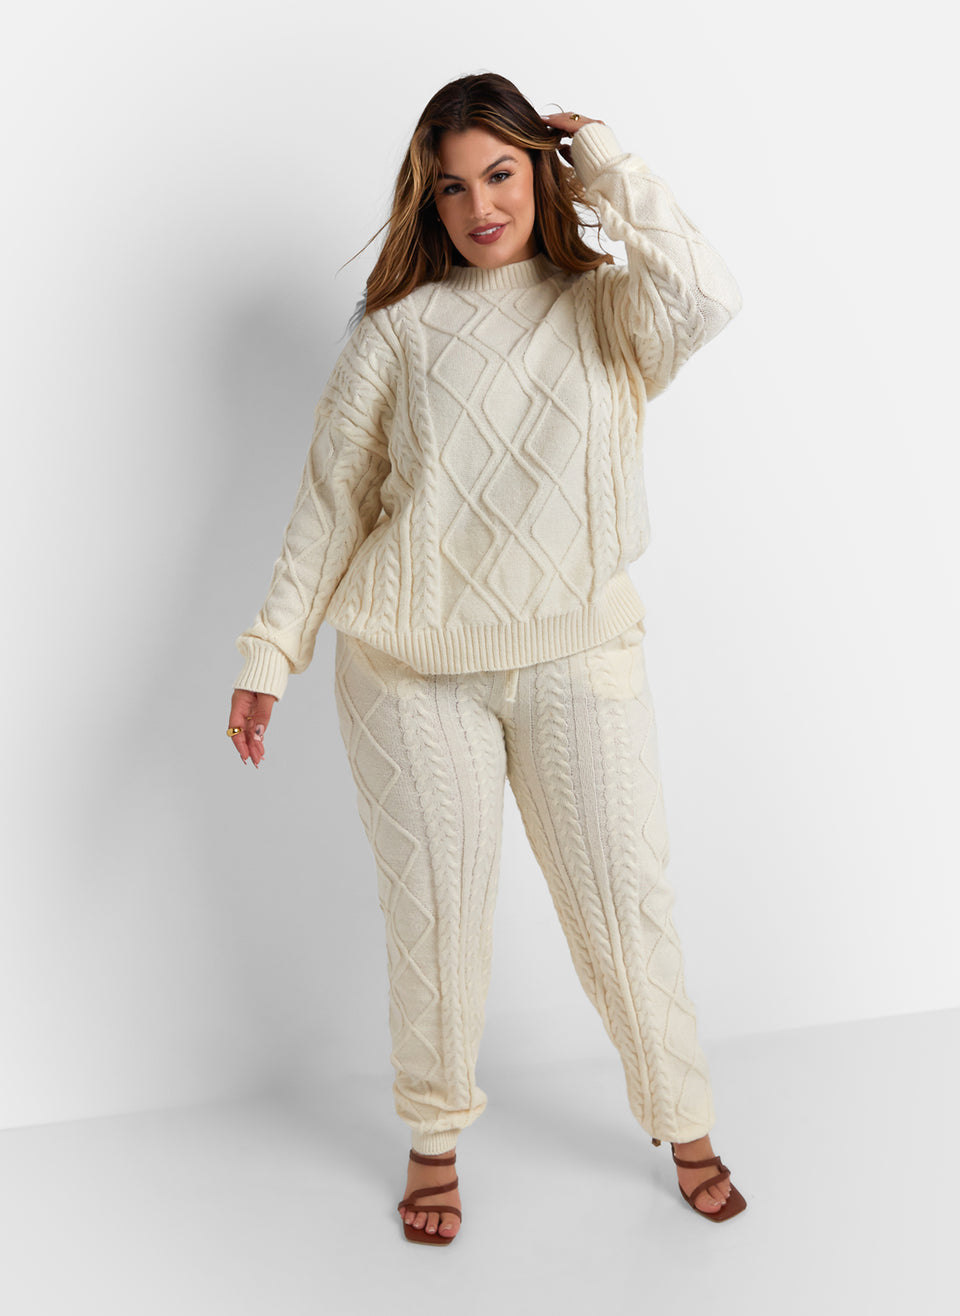 Winter Plus size loungewear from Rebdolls Claudia CABLE KNIT JOGGERS W. POCKETS - IVORY